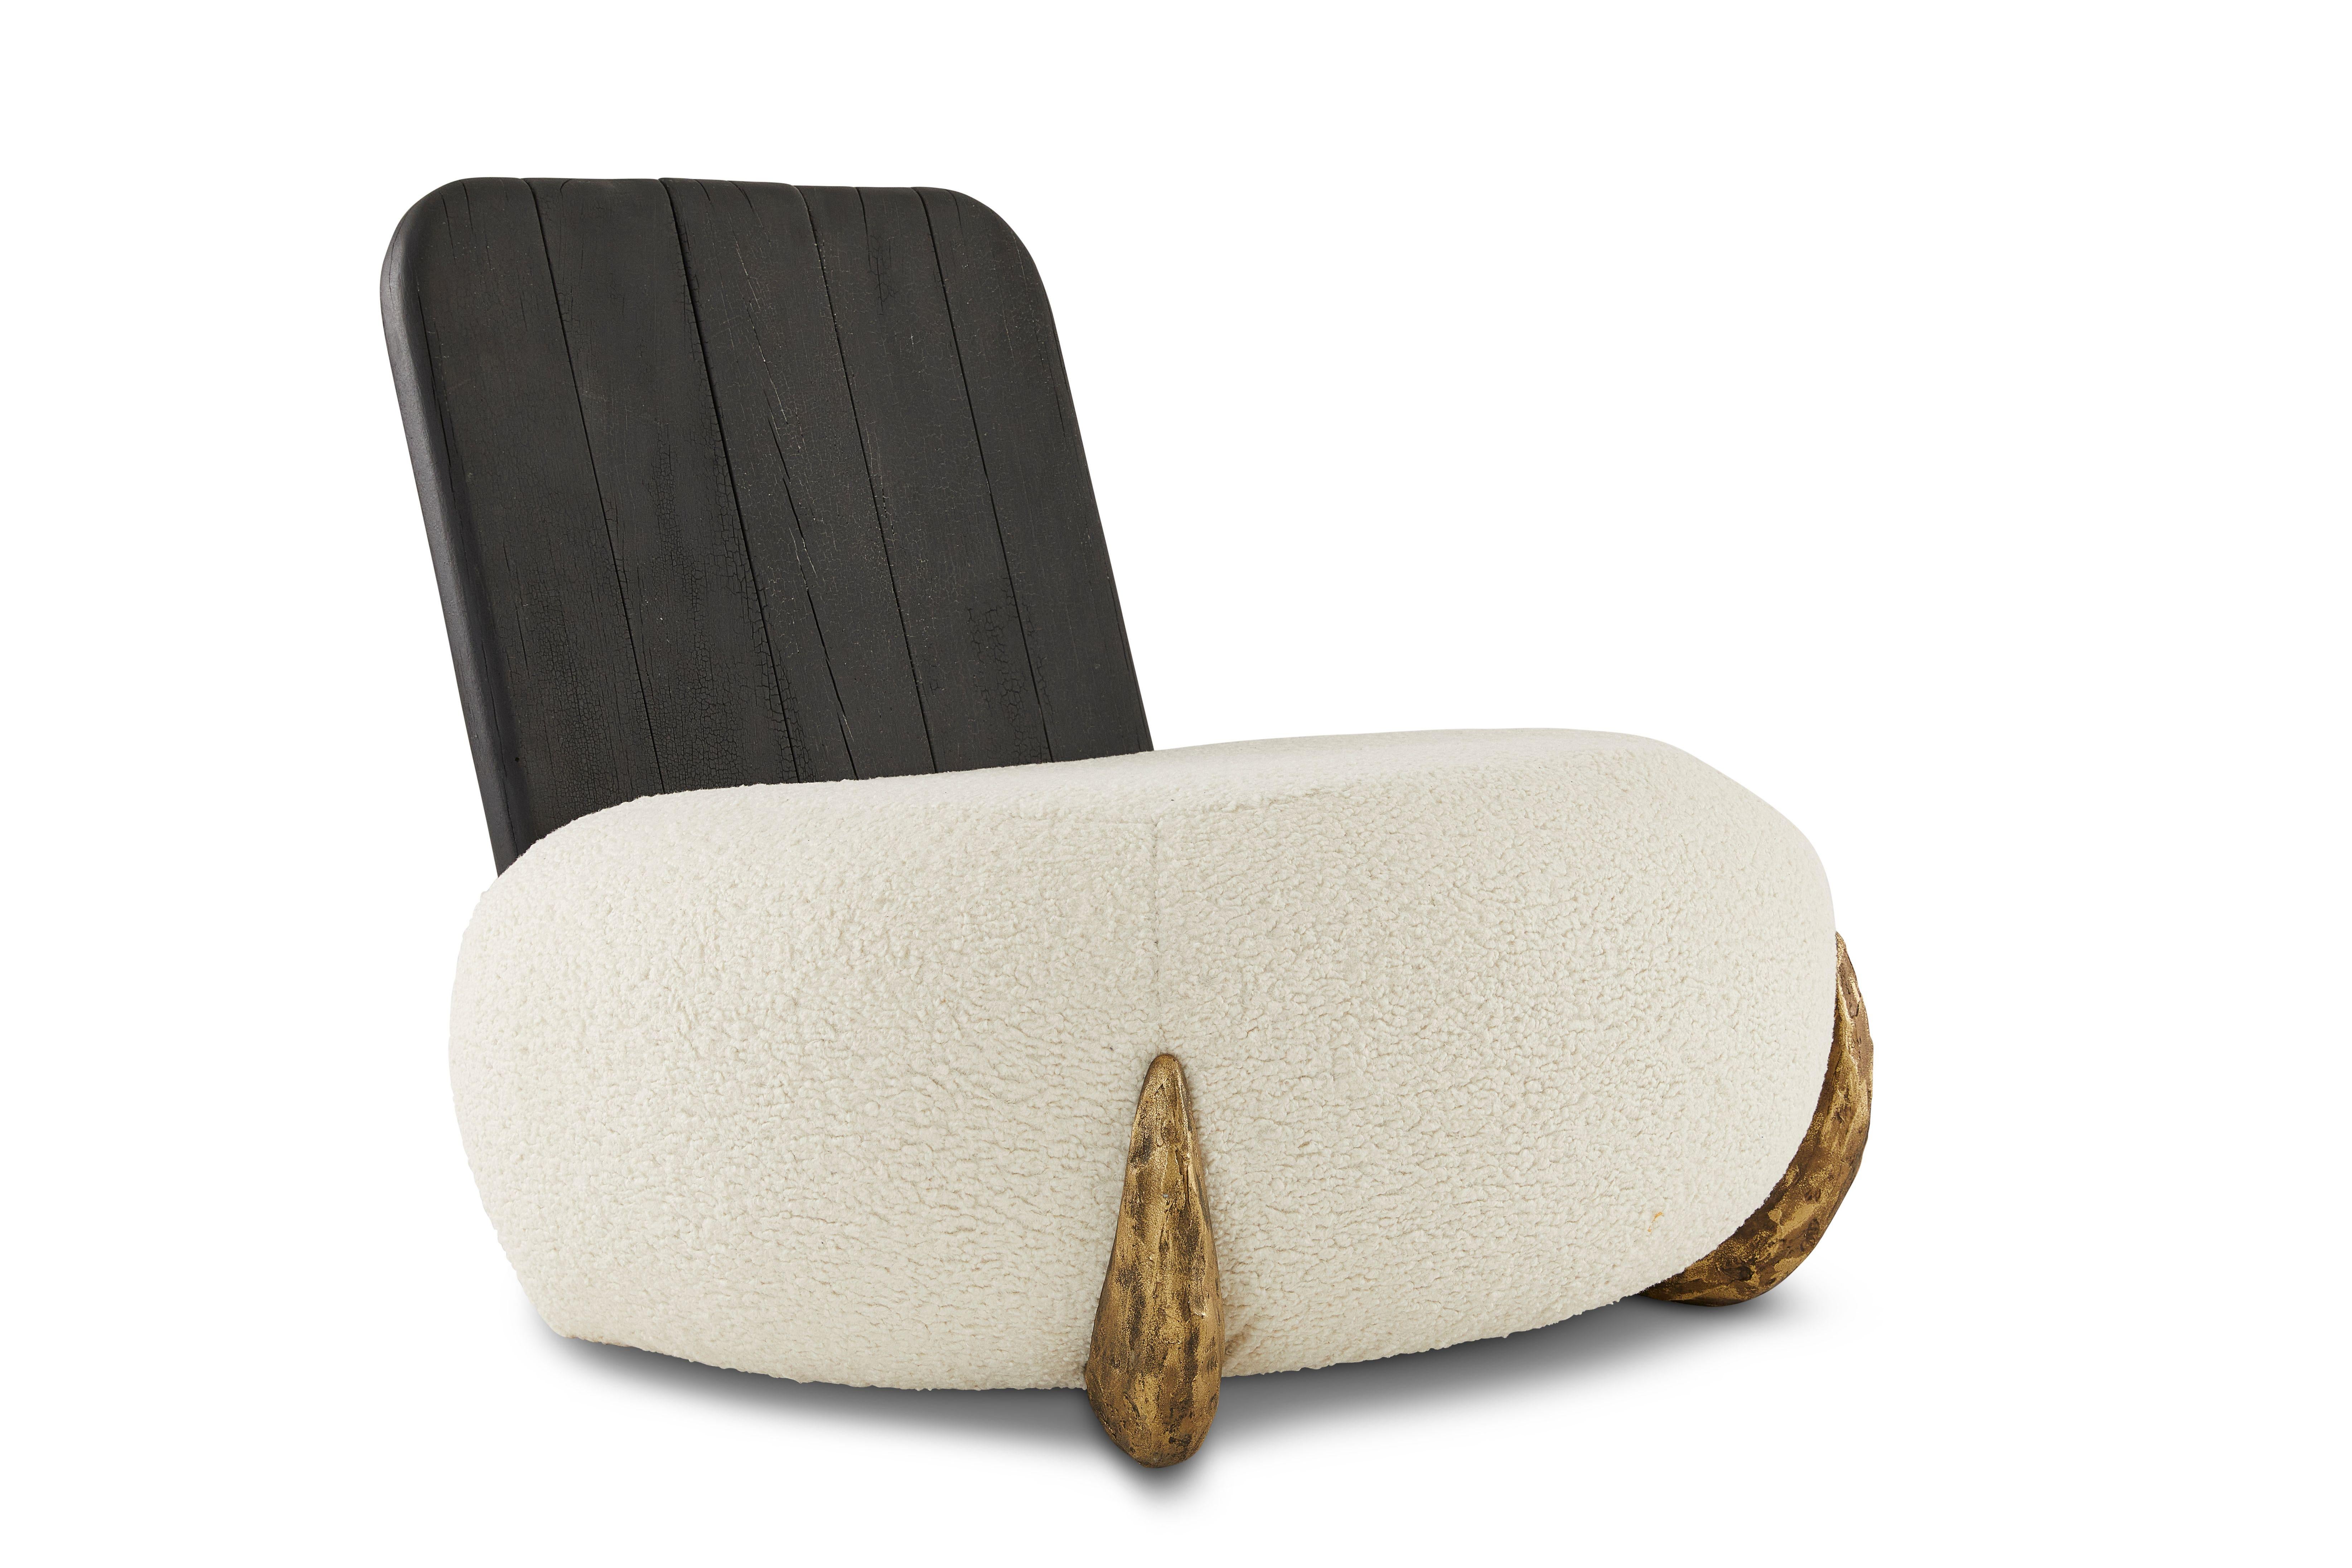 Sherpa lounge chair by Egg Designs
Dimensions: 95 L X 90 D X 77 H cm
Materials: Solidcast brass, Boucle upholstry, Shou Sugi ban hard wood

Founded by South Africans and life partners, Greg and Roche Dry - Egg is a unique perspective in